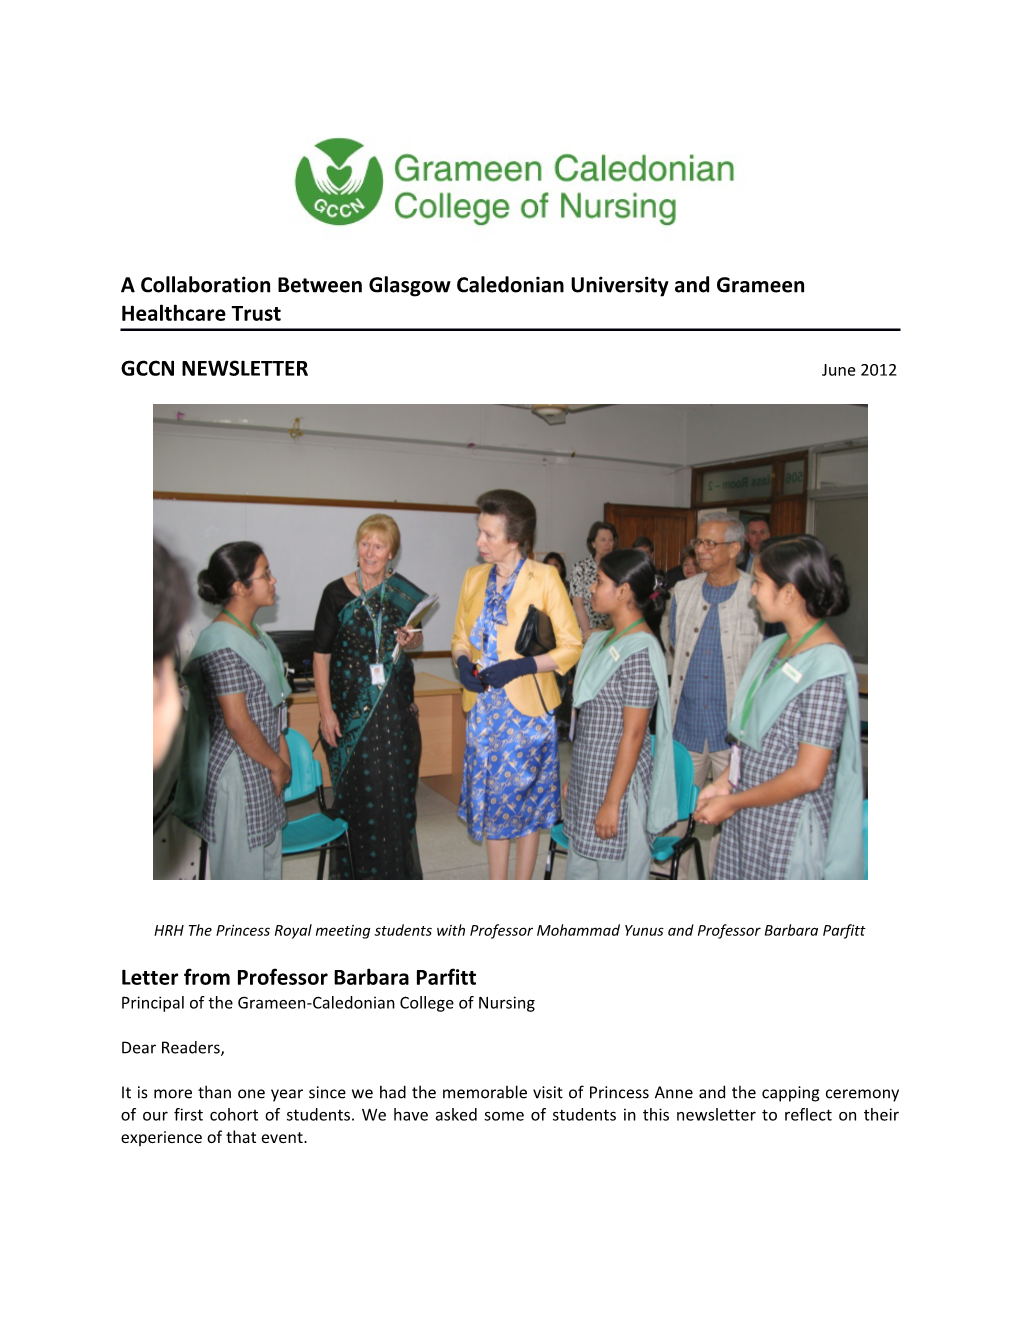 A Collaboration Between Glasgow Caledonian University and Grameen Healthcare Trust